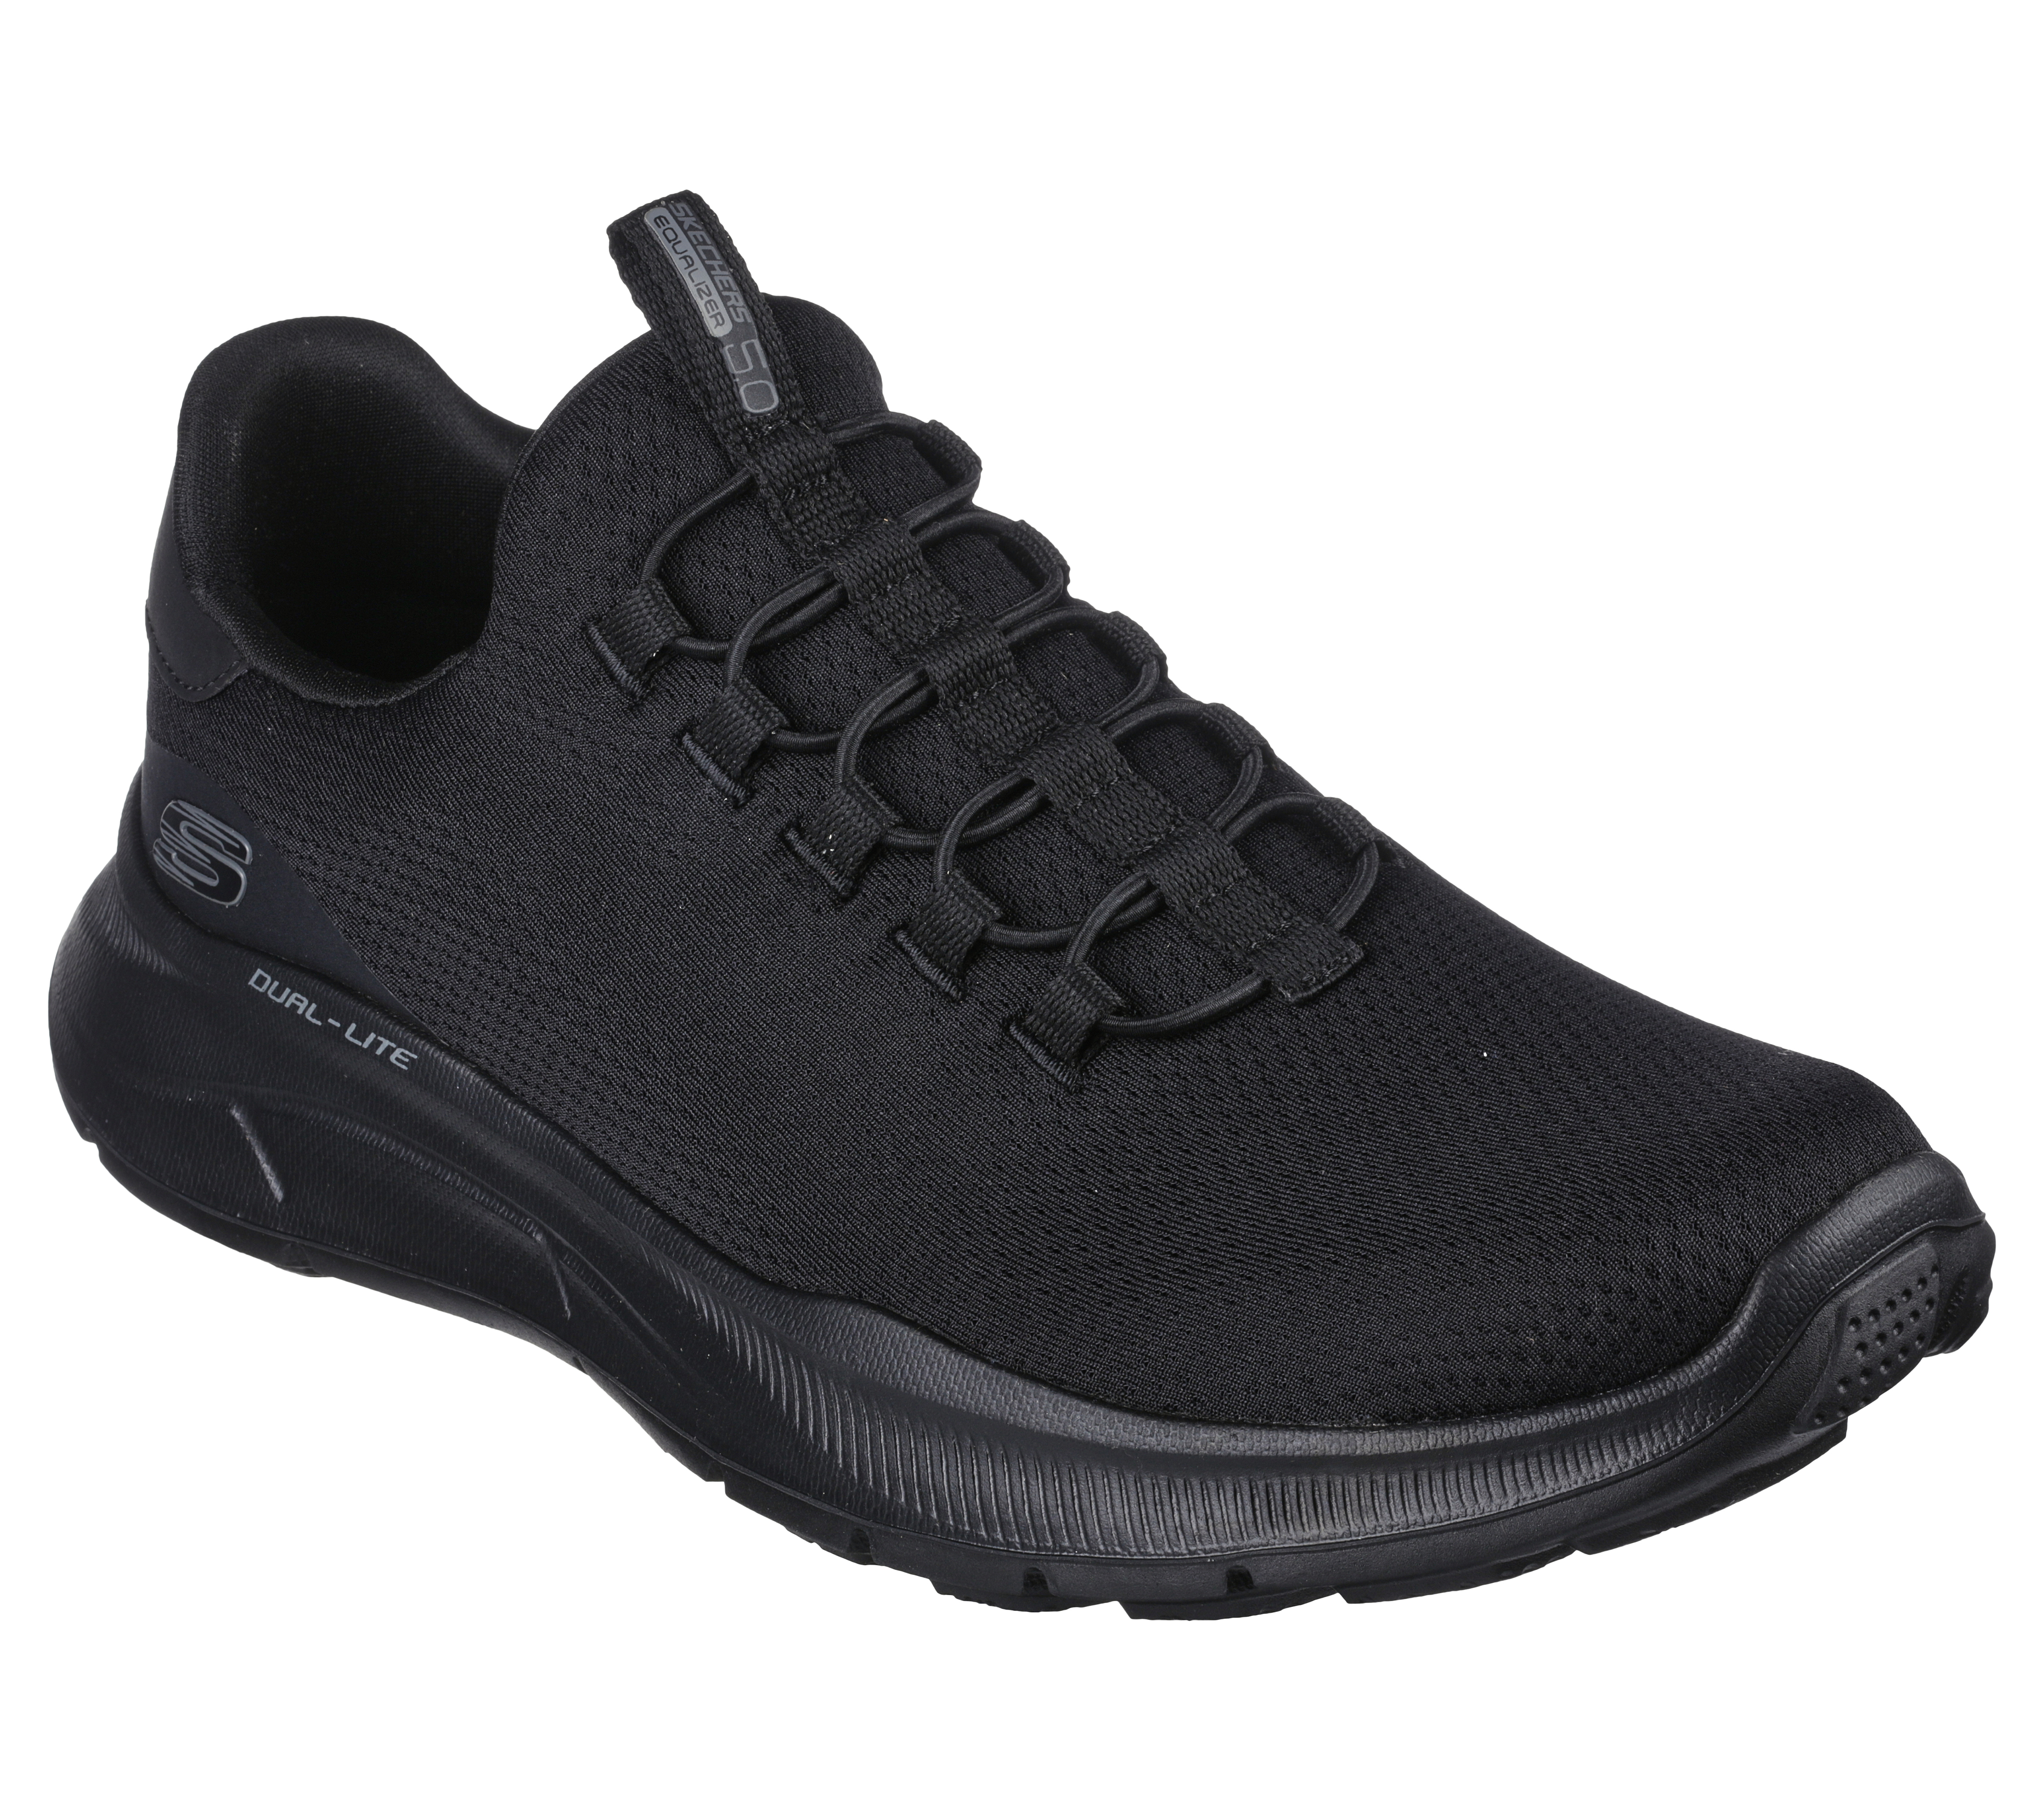 Relaxed 5.0 Equalizer Fit: Lemba | SKECHERS -